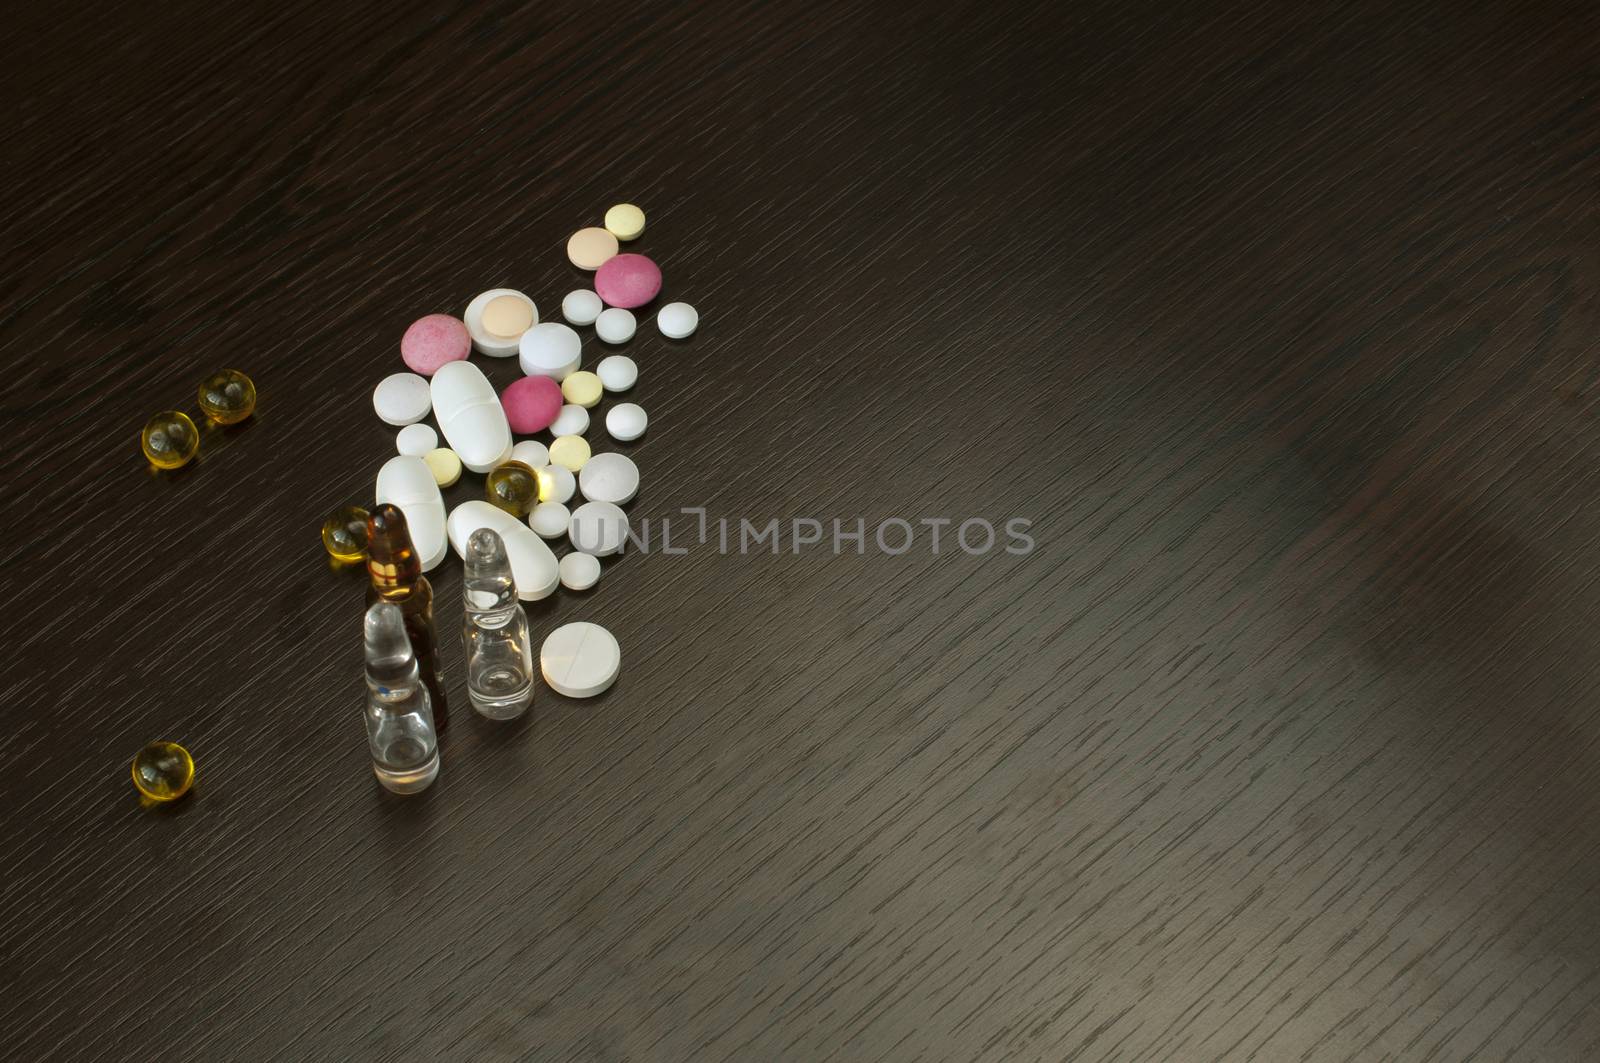 Pile drugs and ampoules on table